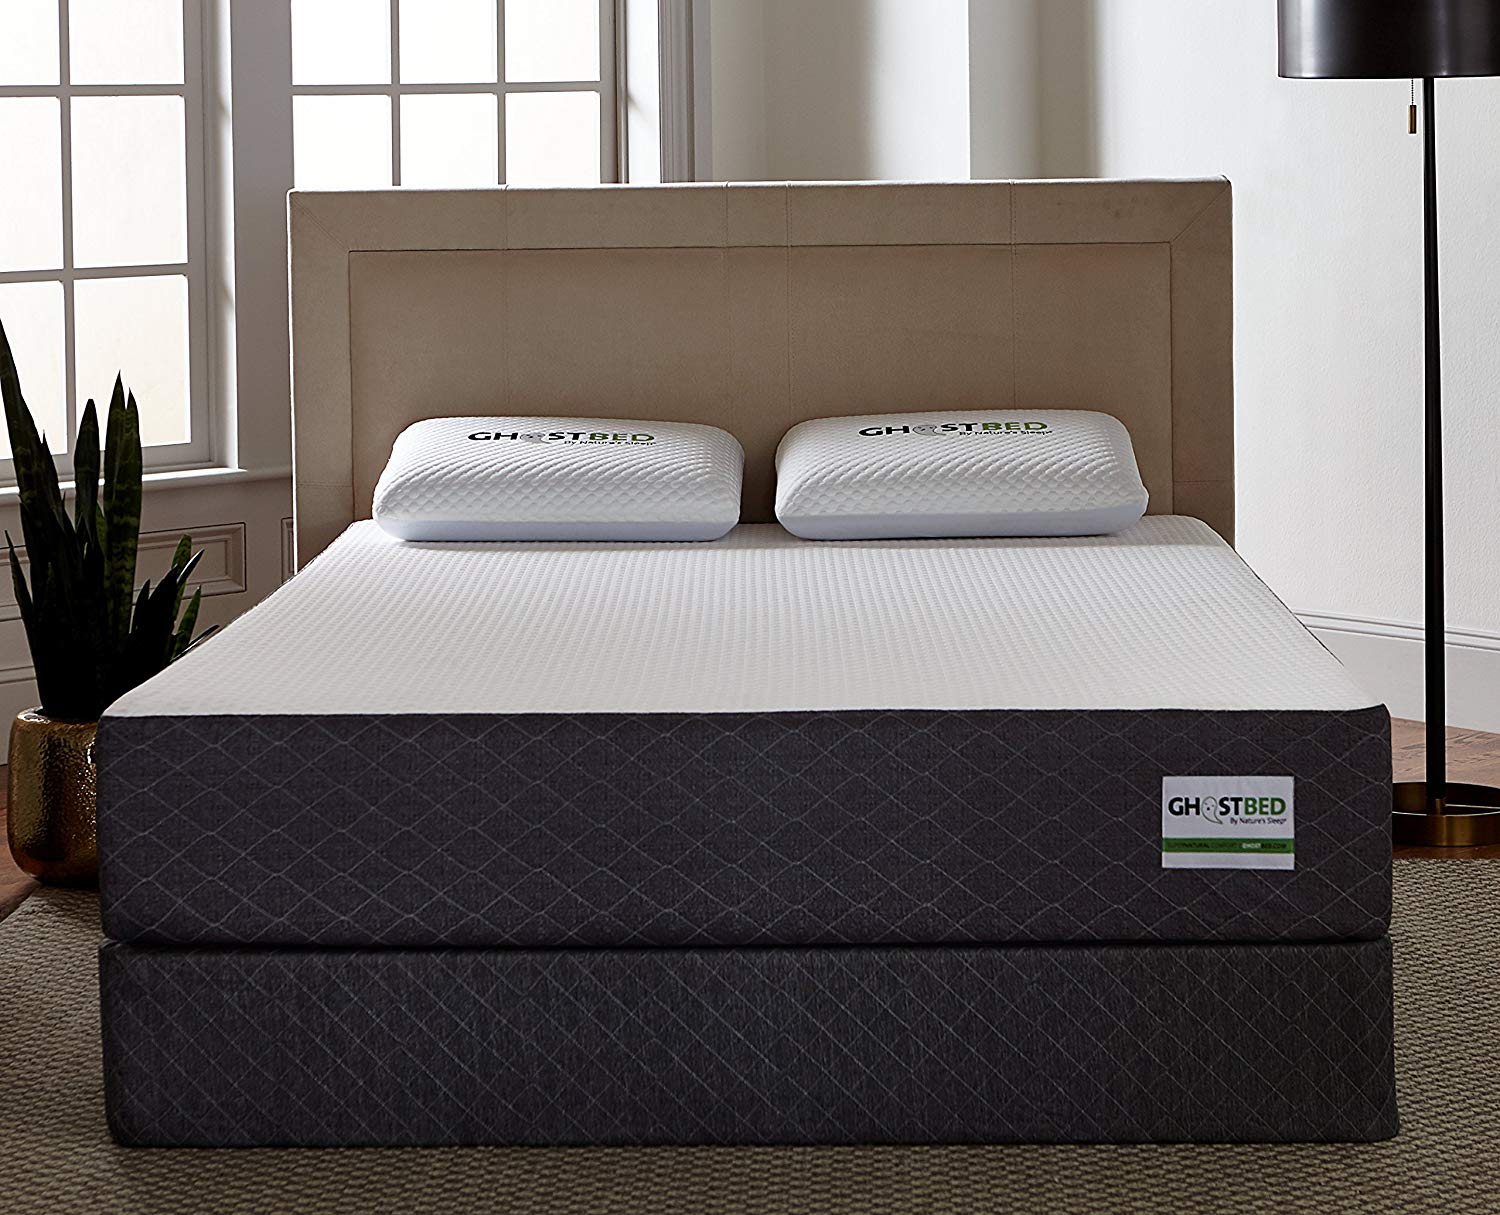 ghostbed queen mattress size dimensions